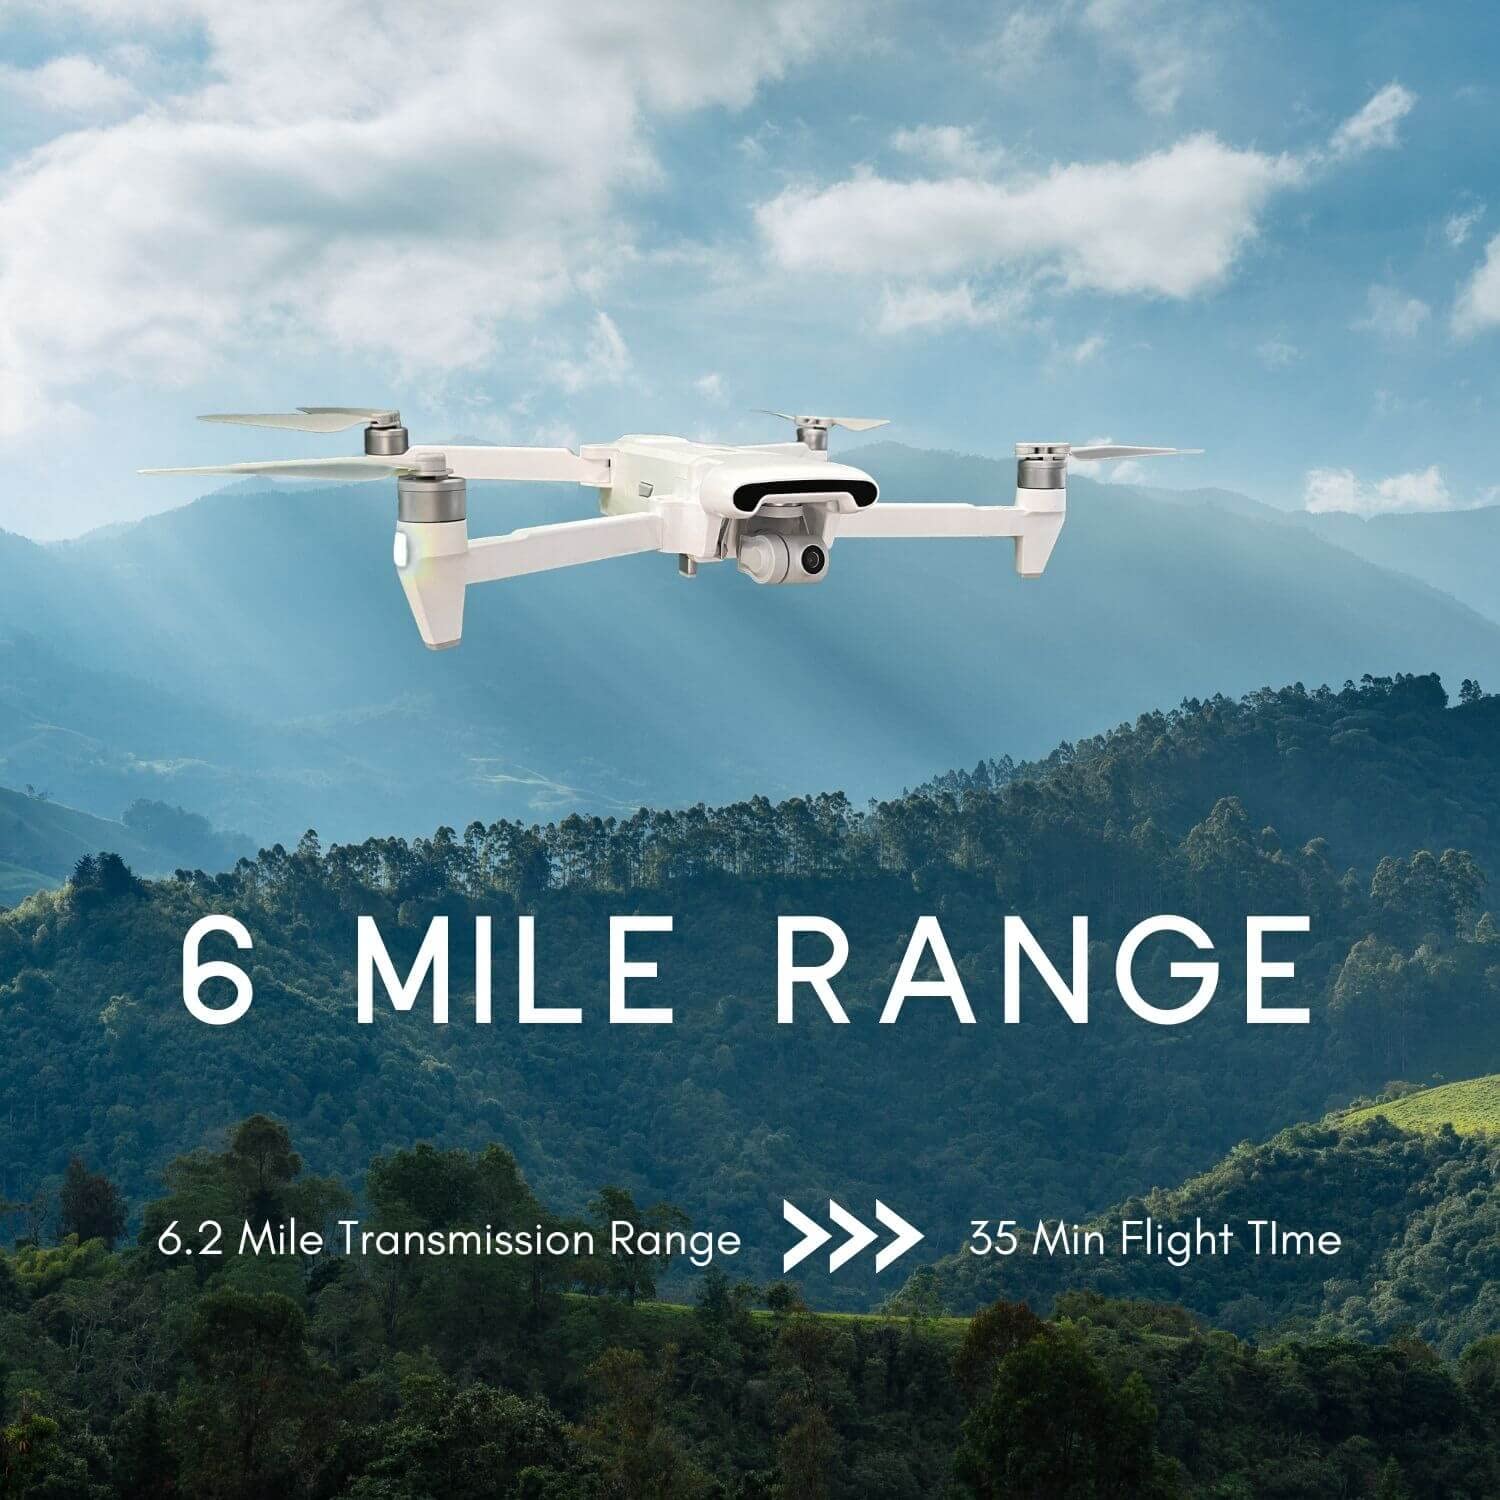 What Is The Range On A Drone